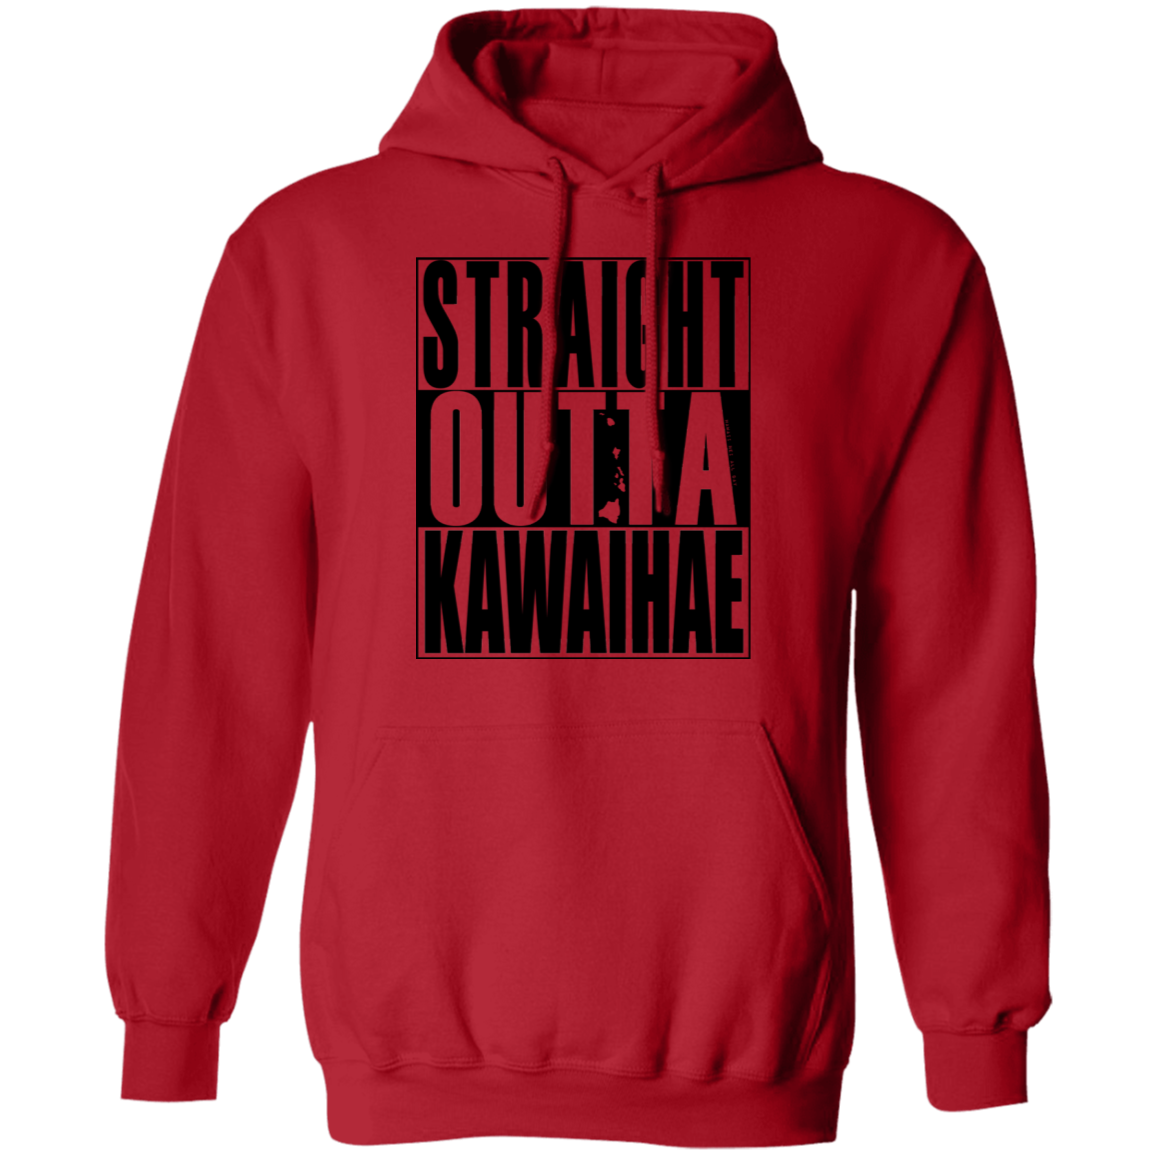 Straight Outta Kawaihae (black ink) Pullover Hoodie